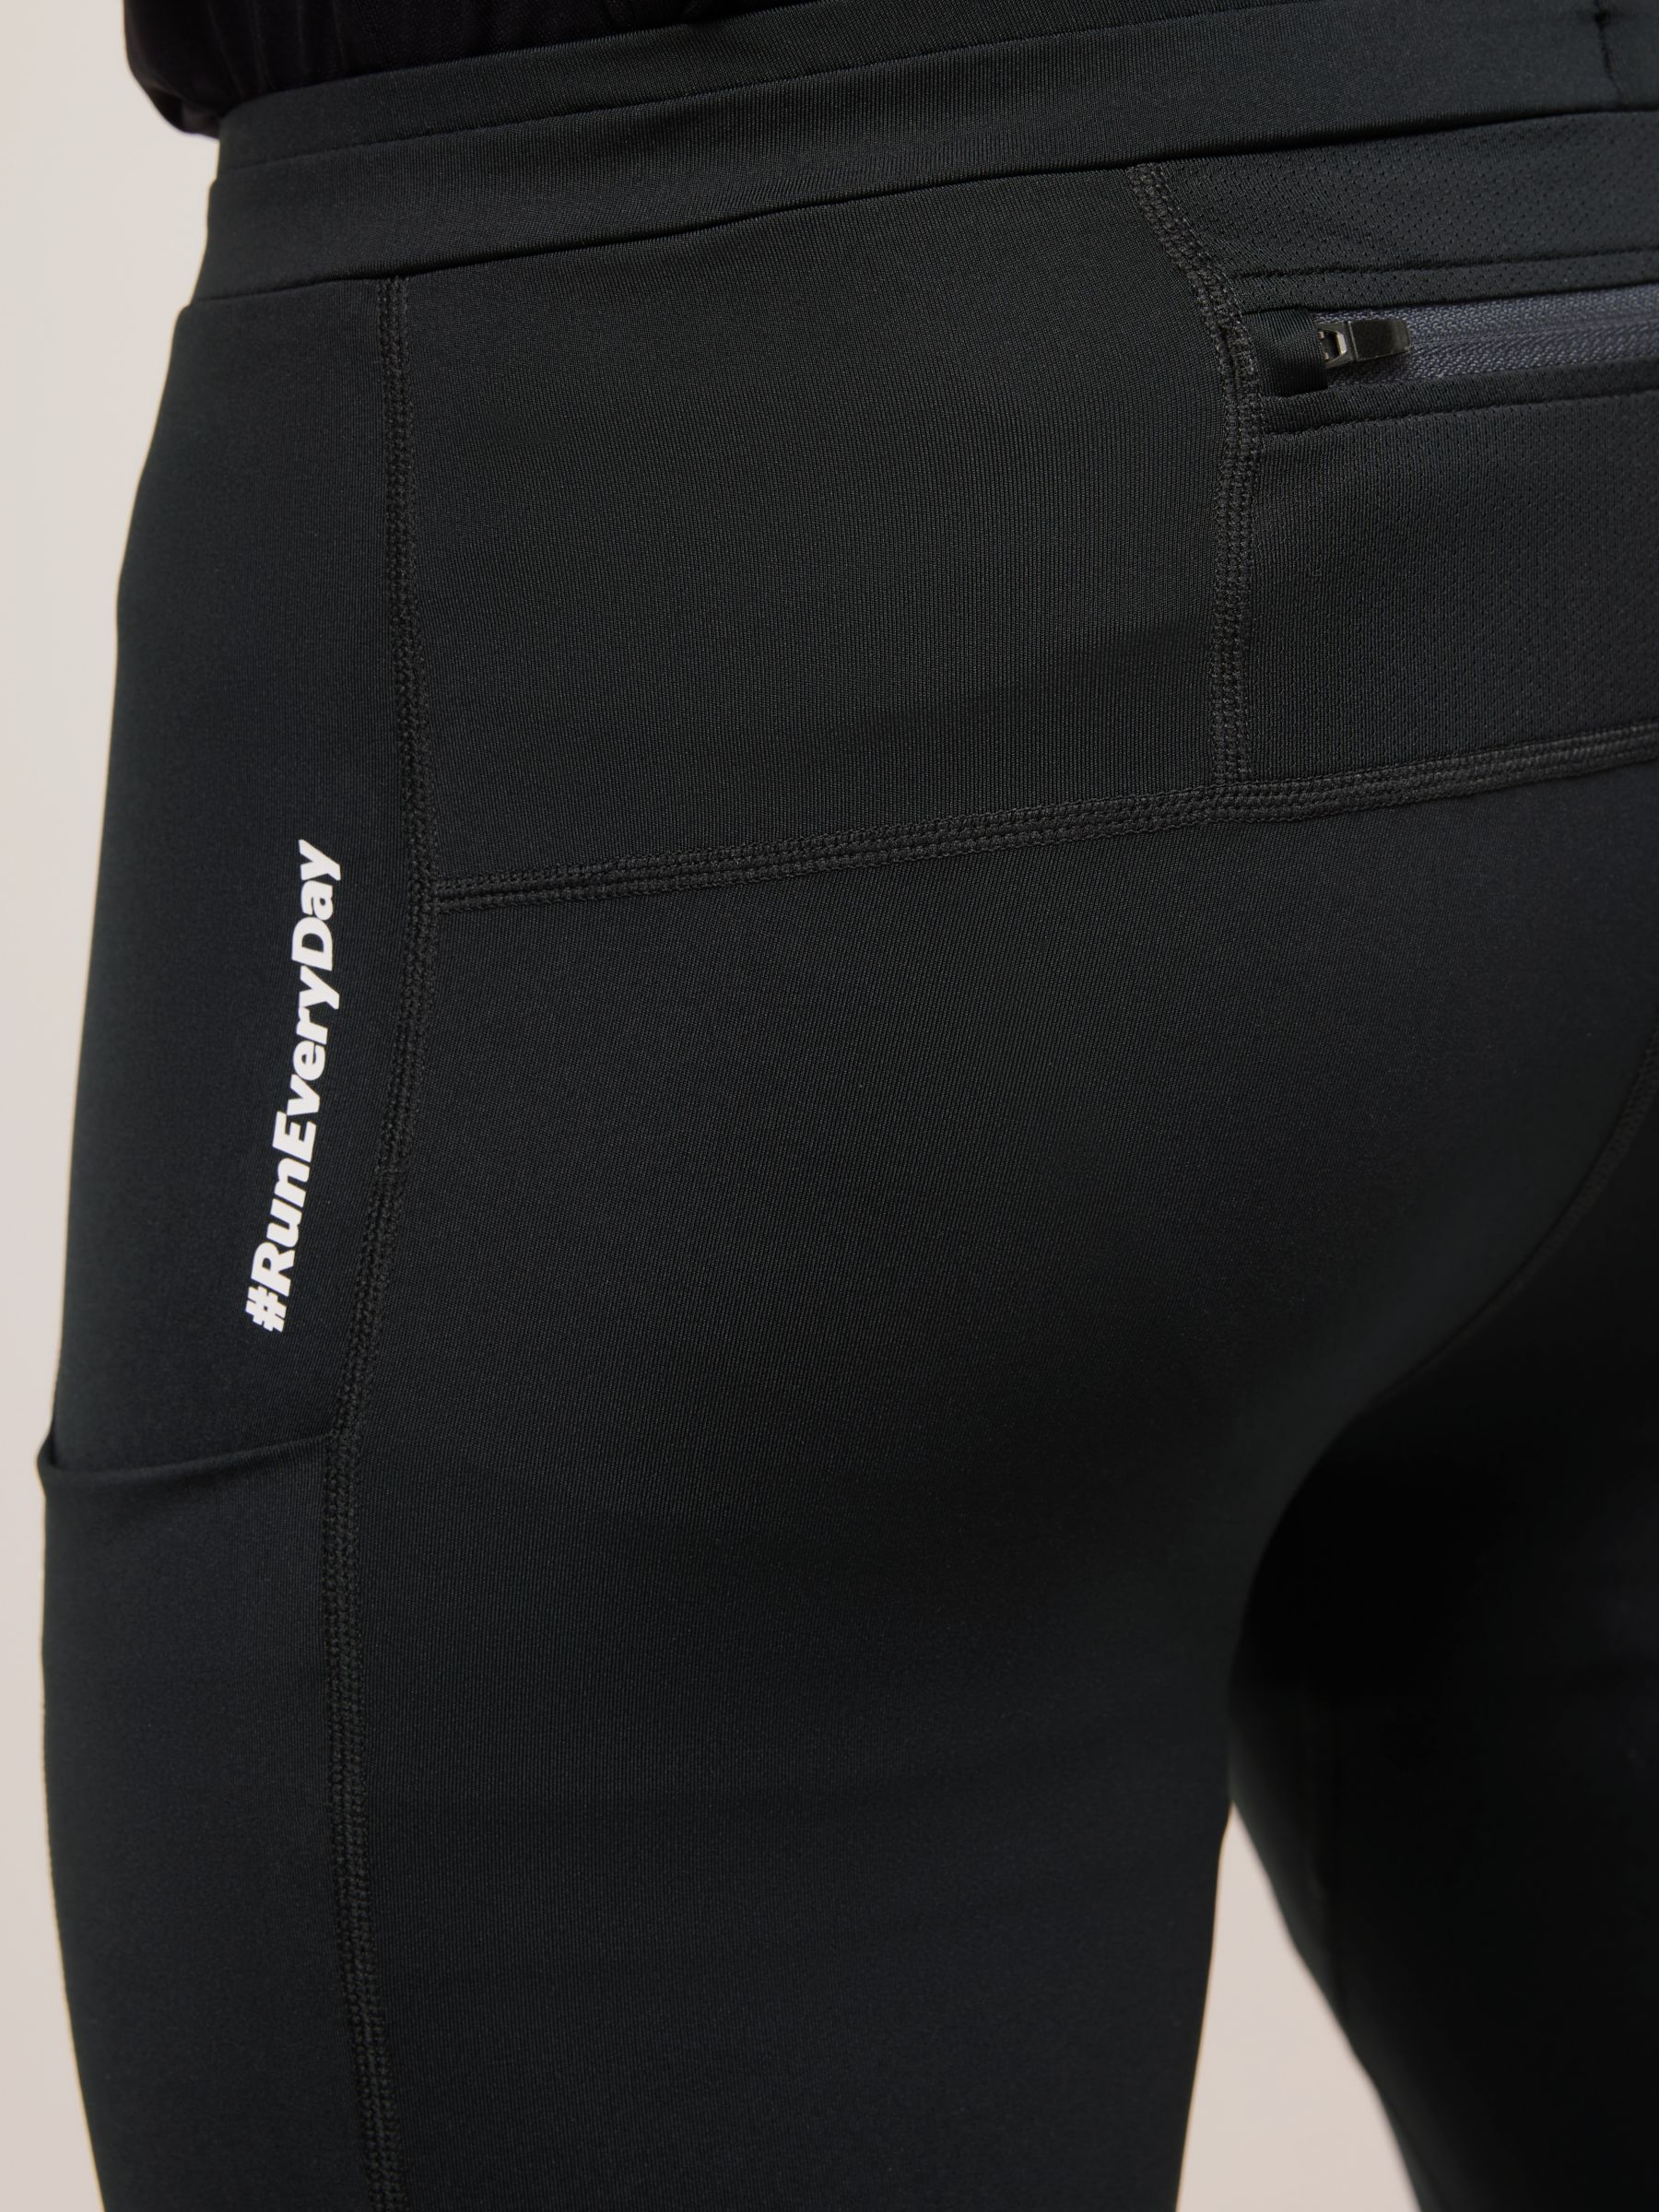 Ronhill Tech Revive Stretchy & Breathable Running Tights Black